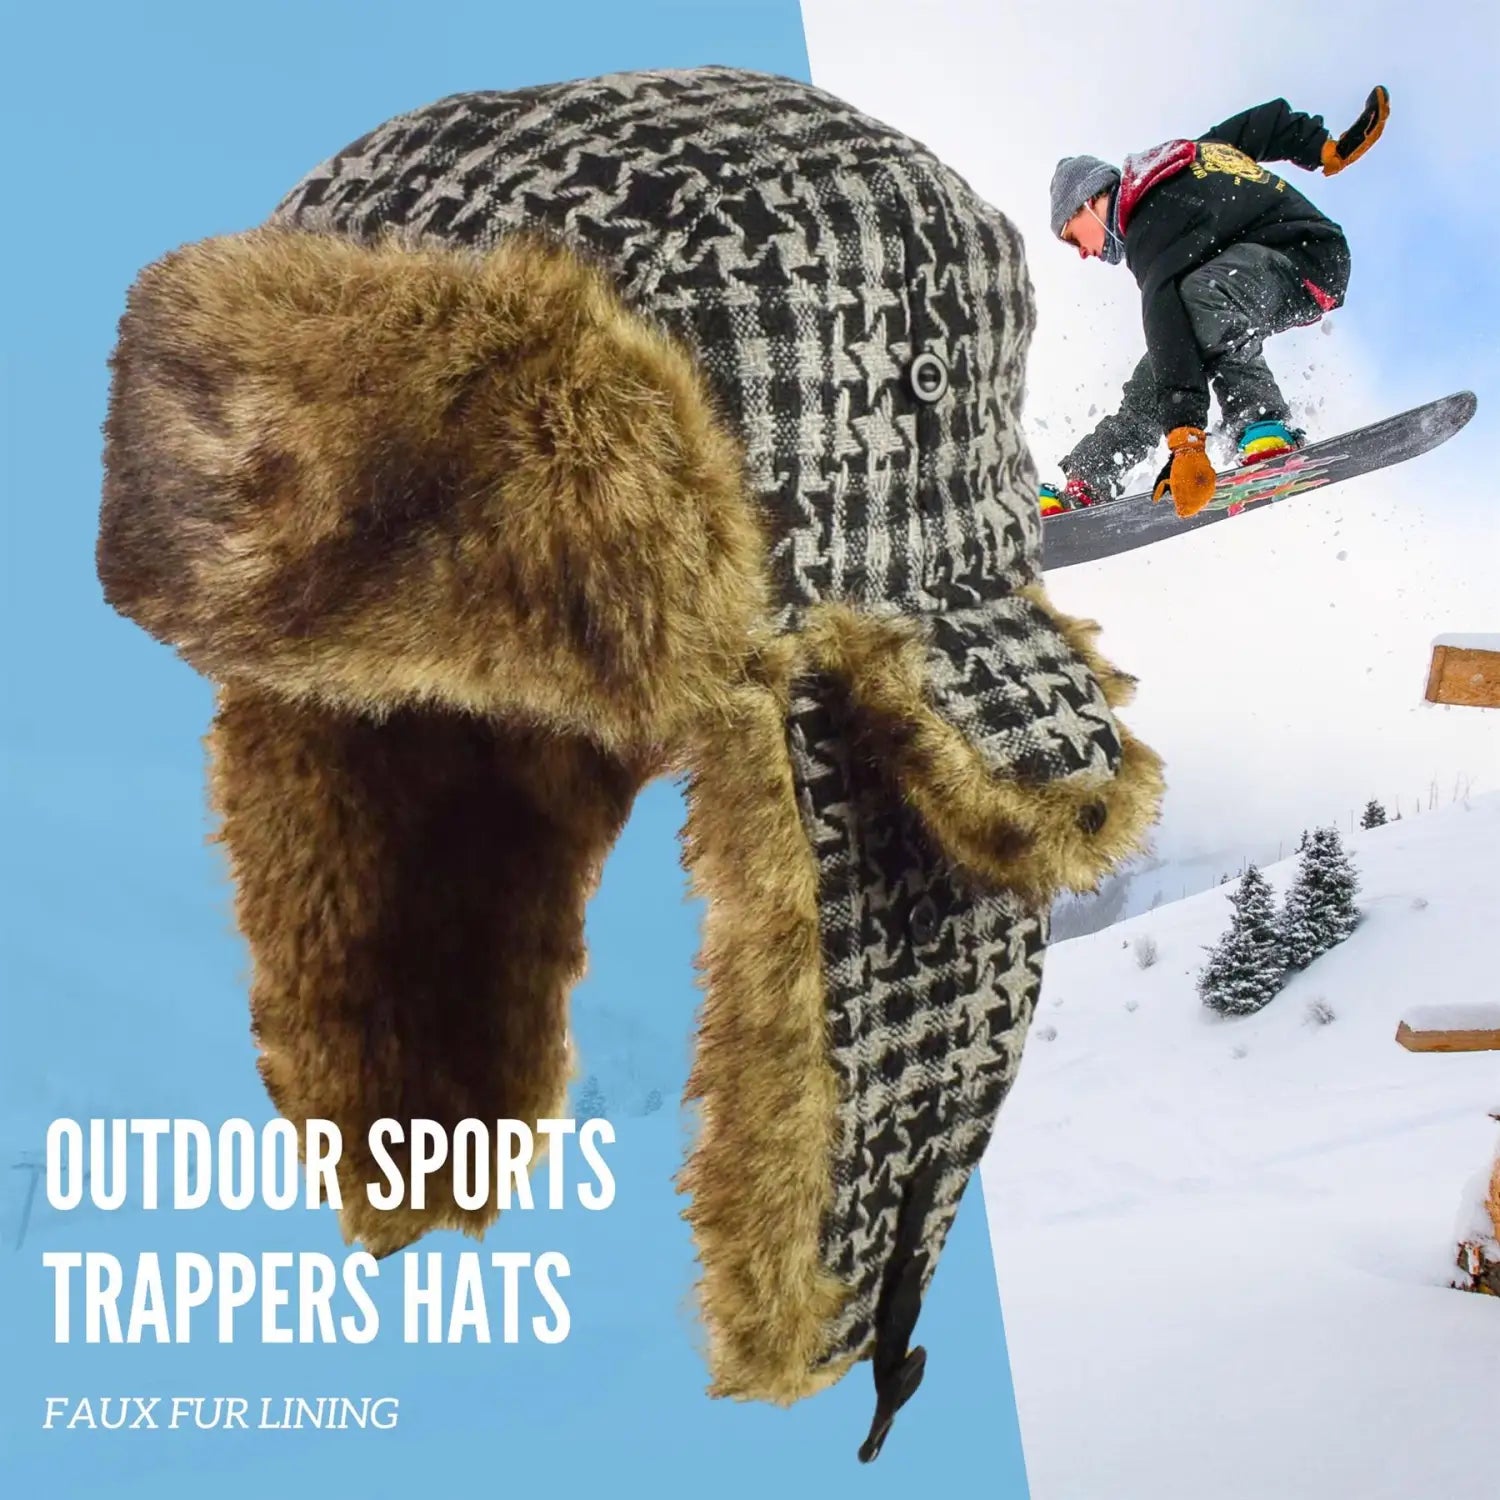 Person snowboarding in the air wearing faux fur lined thermal winter trapper hat